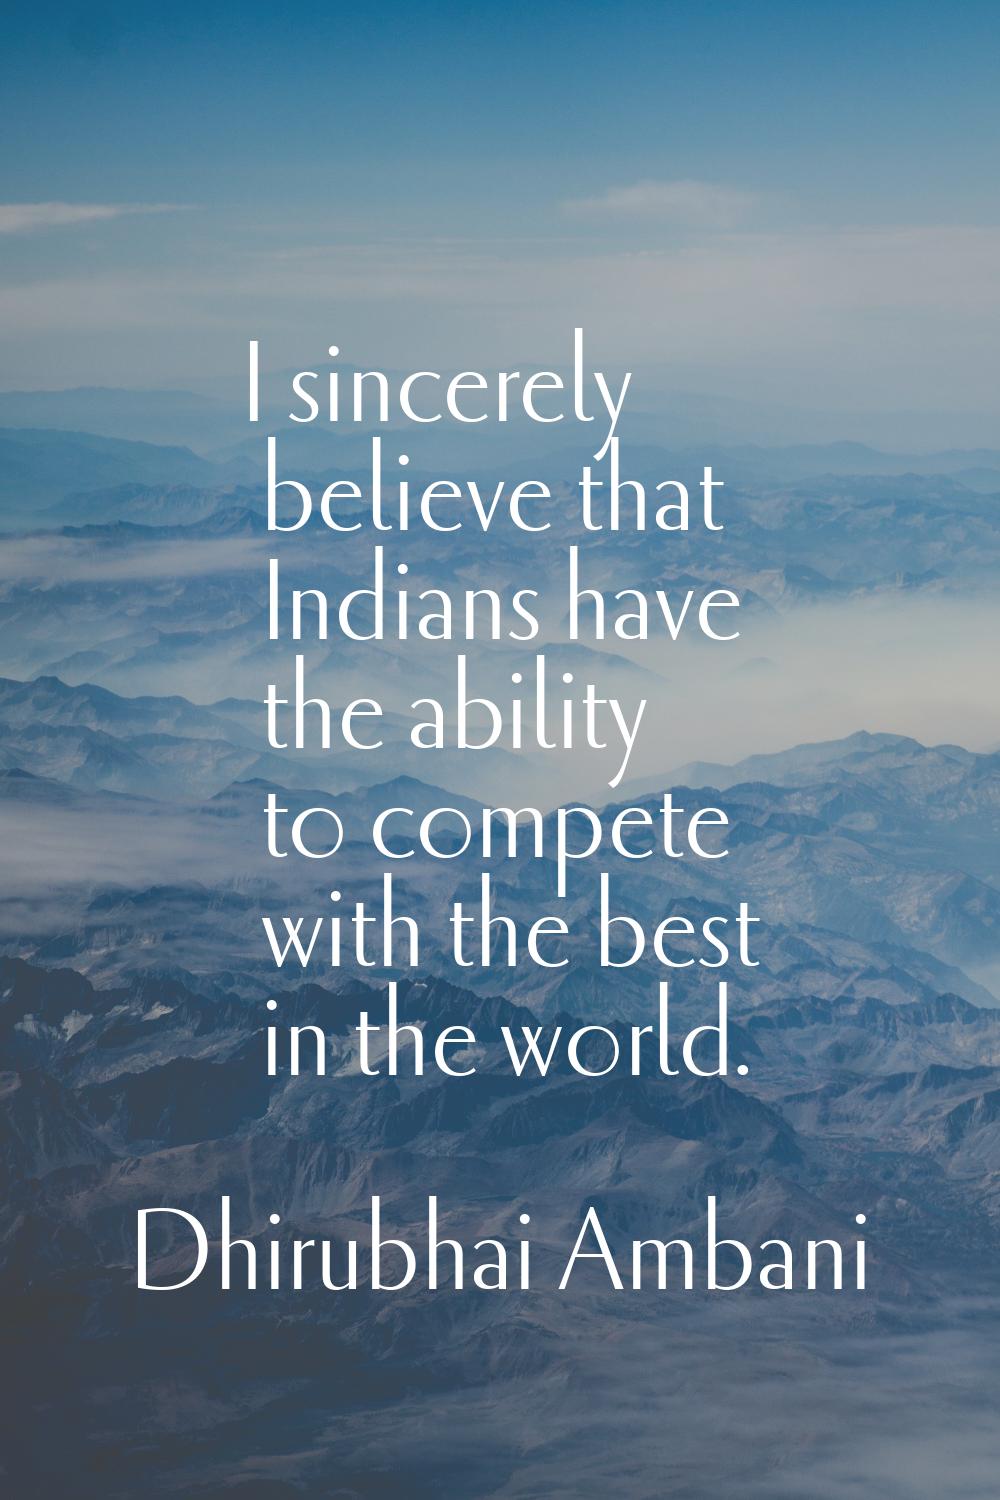 I sincerely believe that Indians have the ability to compete with the best in the world.